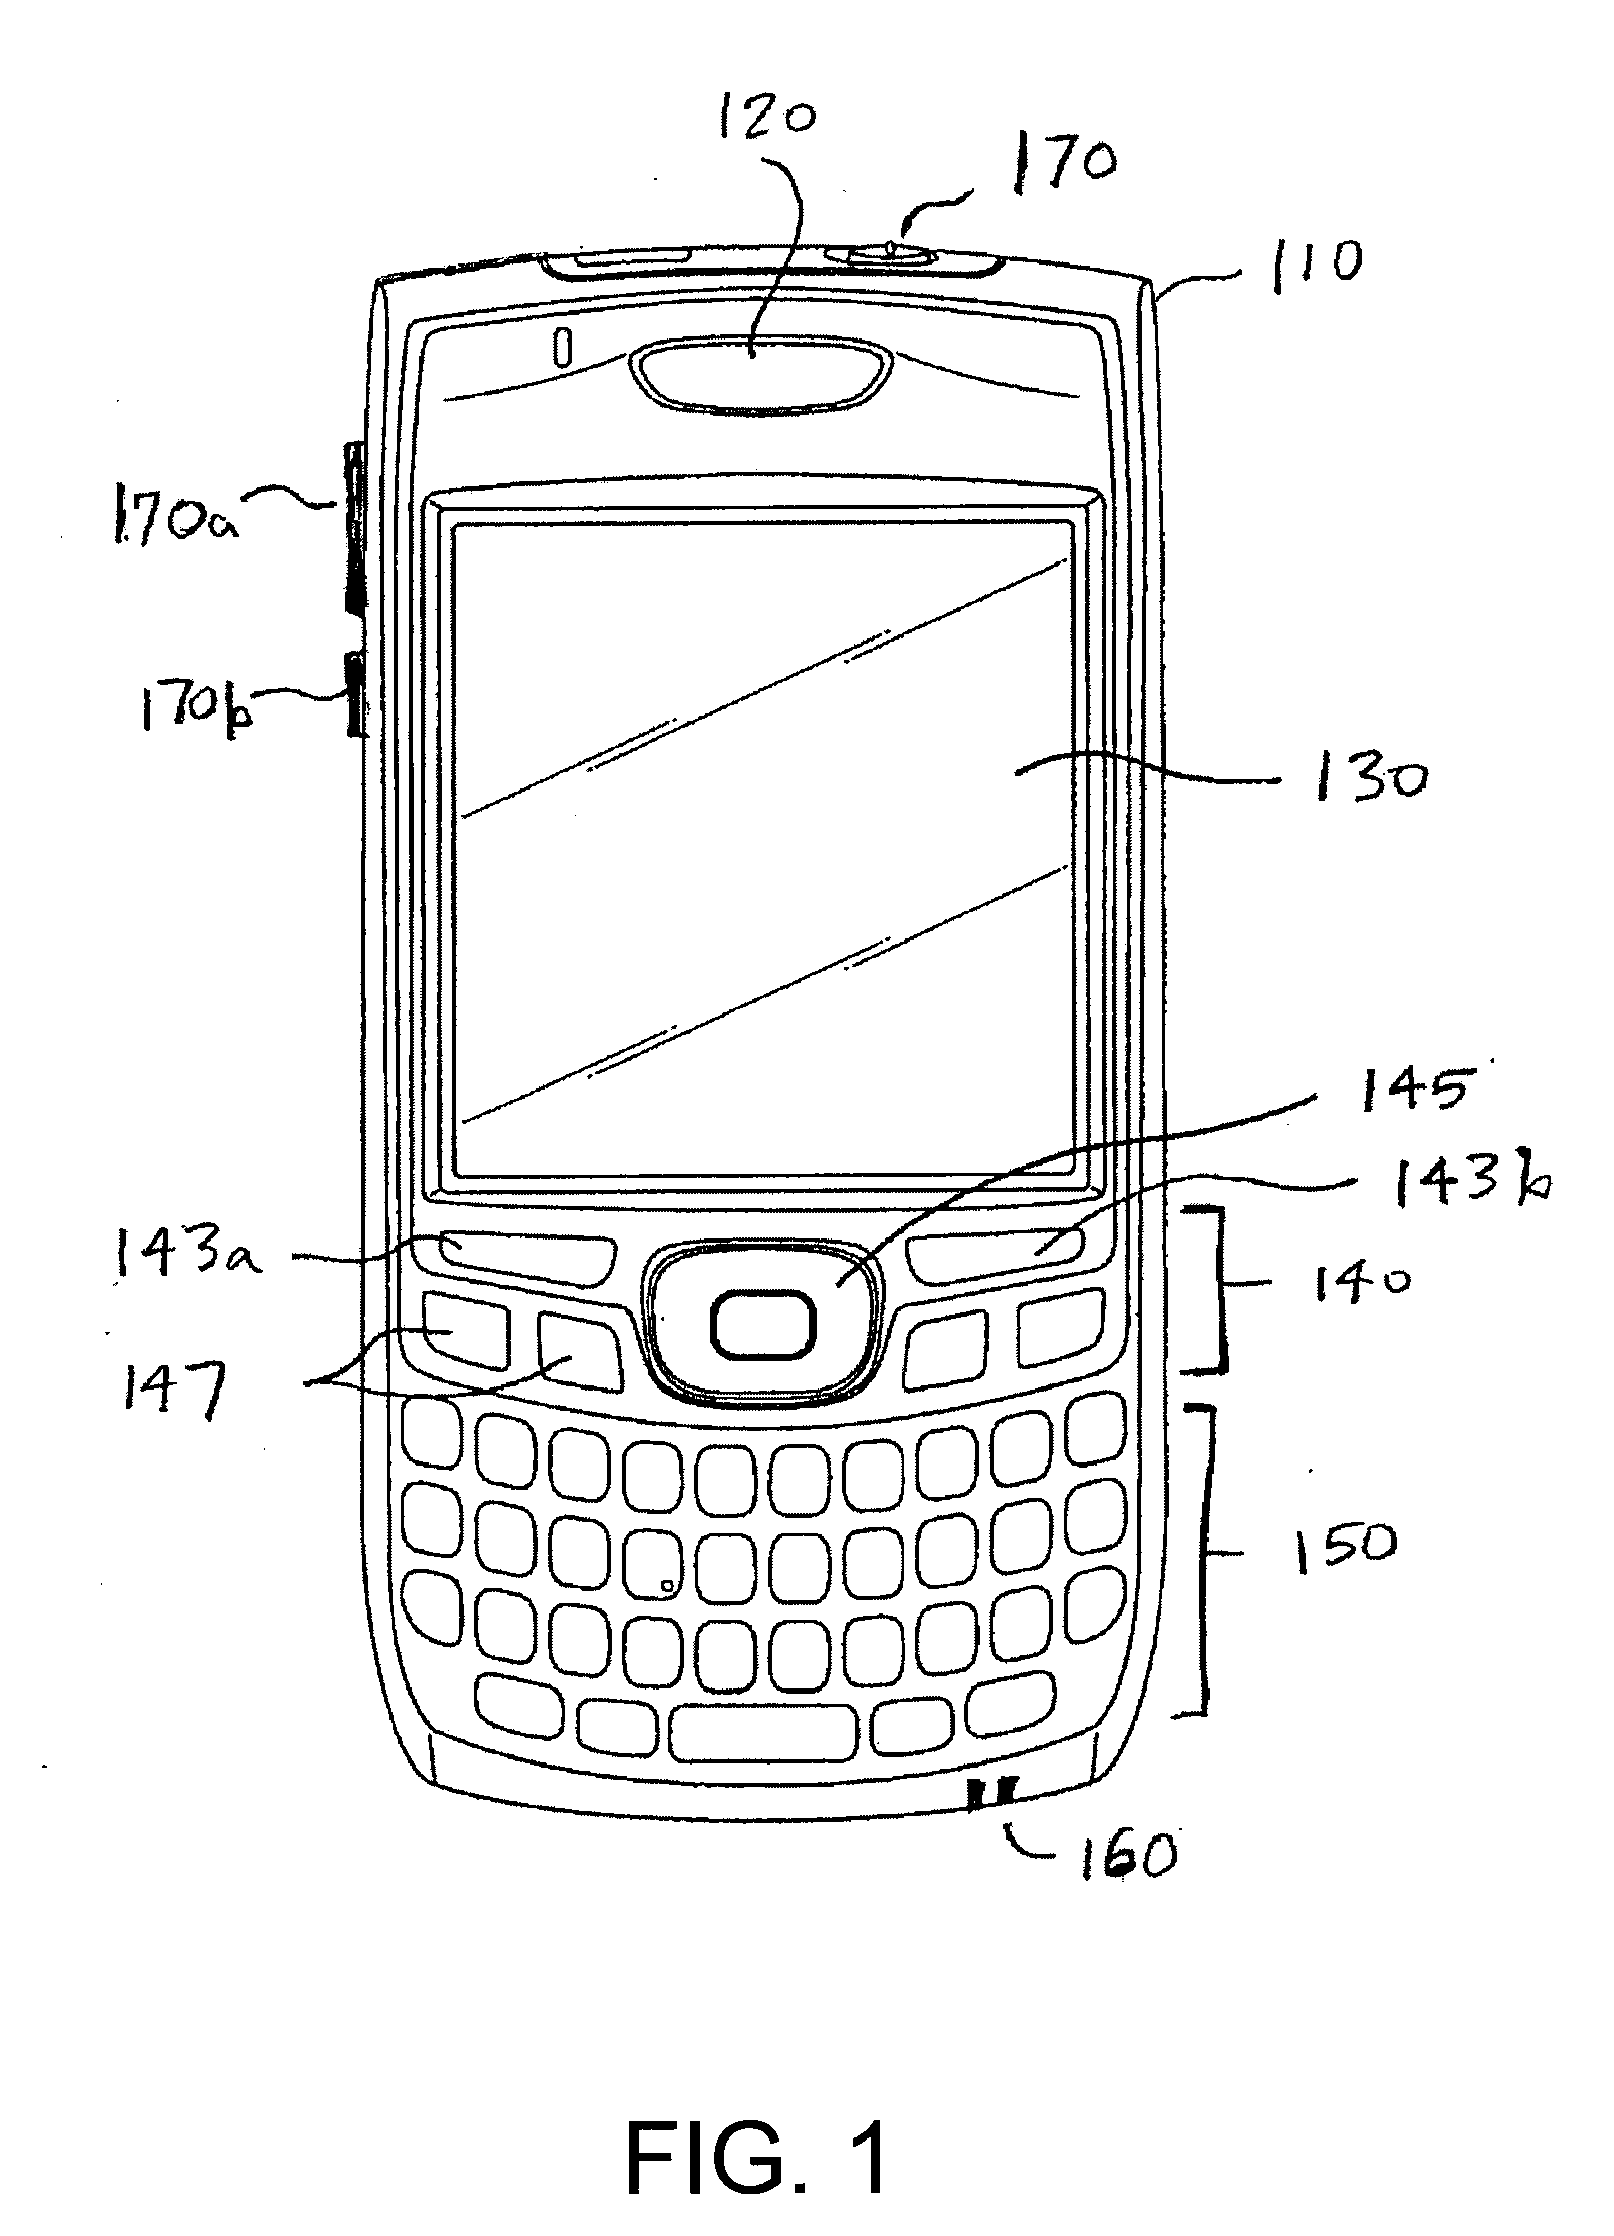 Relationship management on a mobile computing device